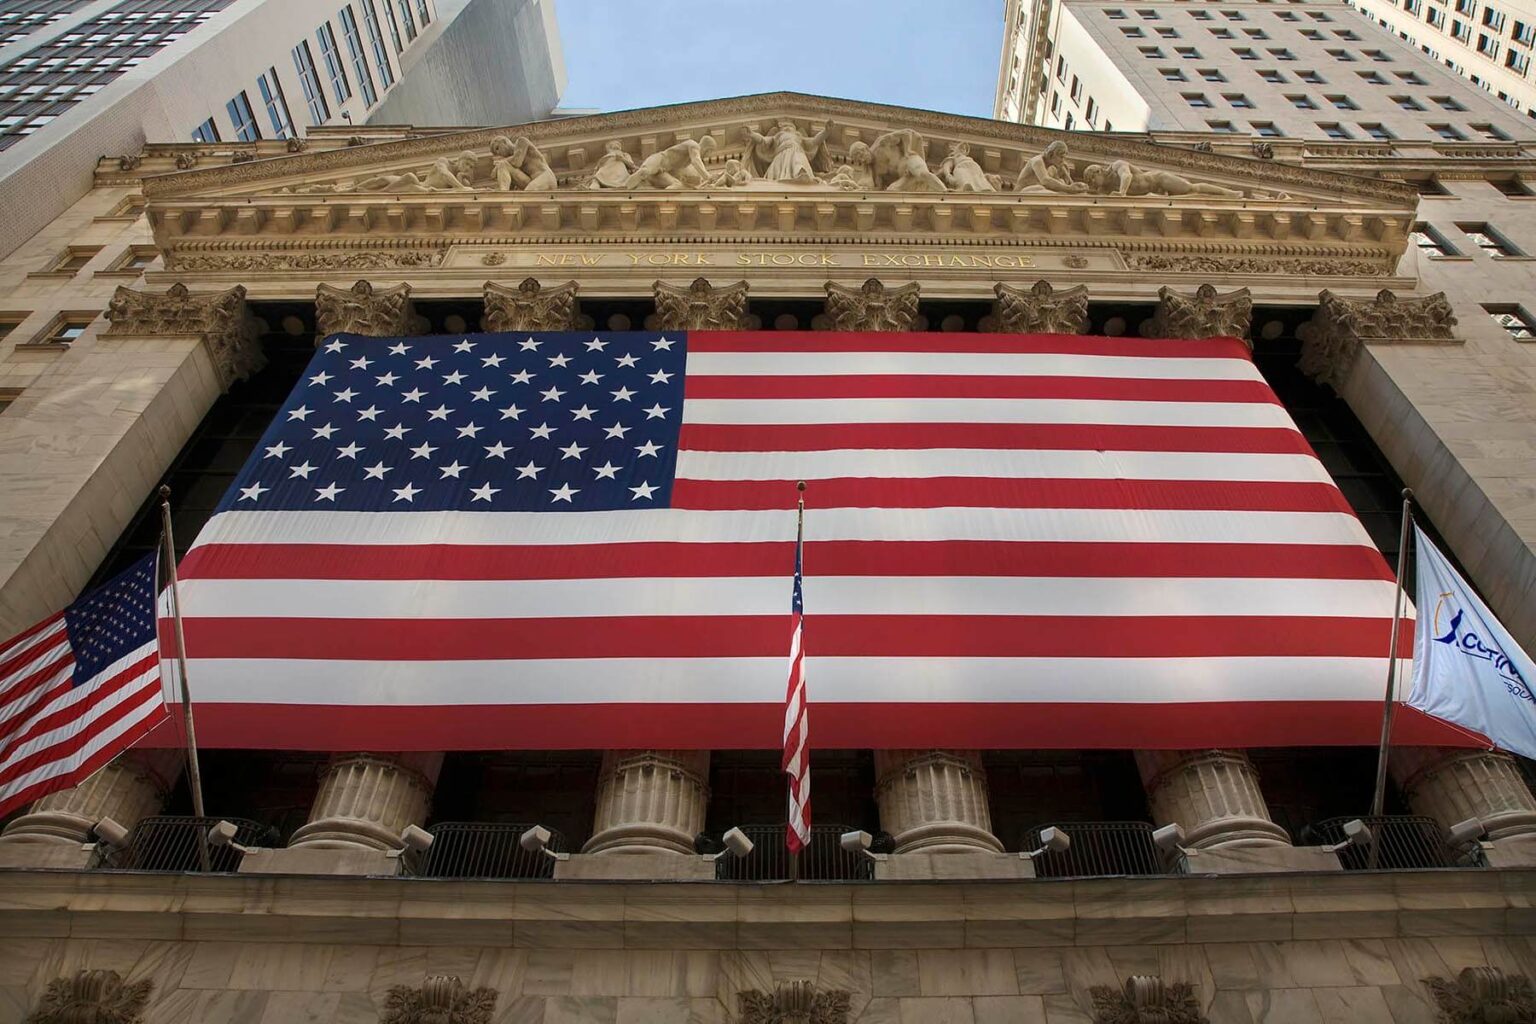 Large AMERICAN FLAG in front of the New Your Stock Exchange in NEW YORK CITY. - Architecture photography by Eagle Visions Photography